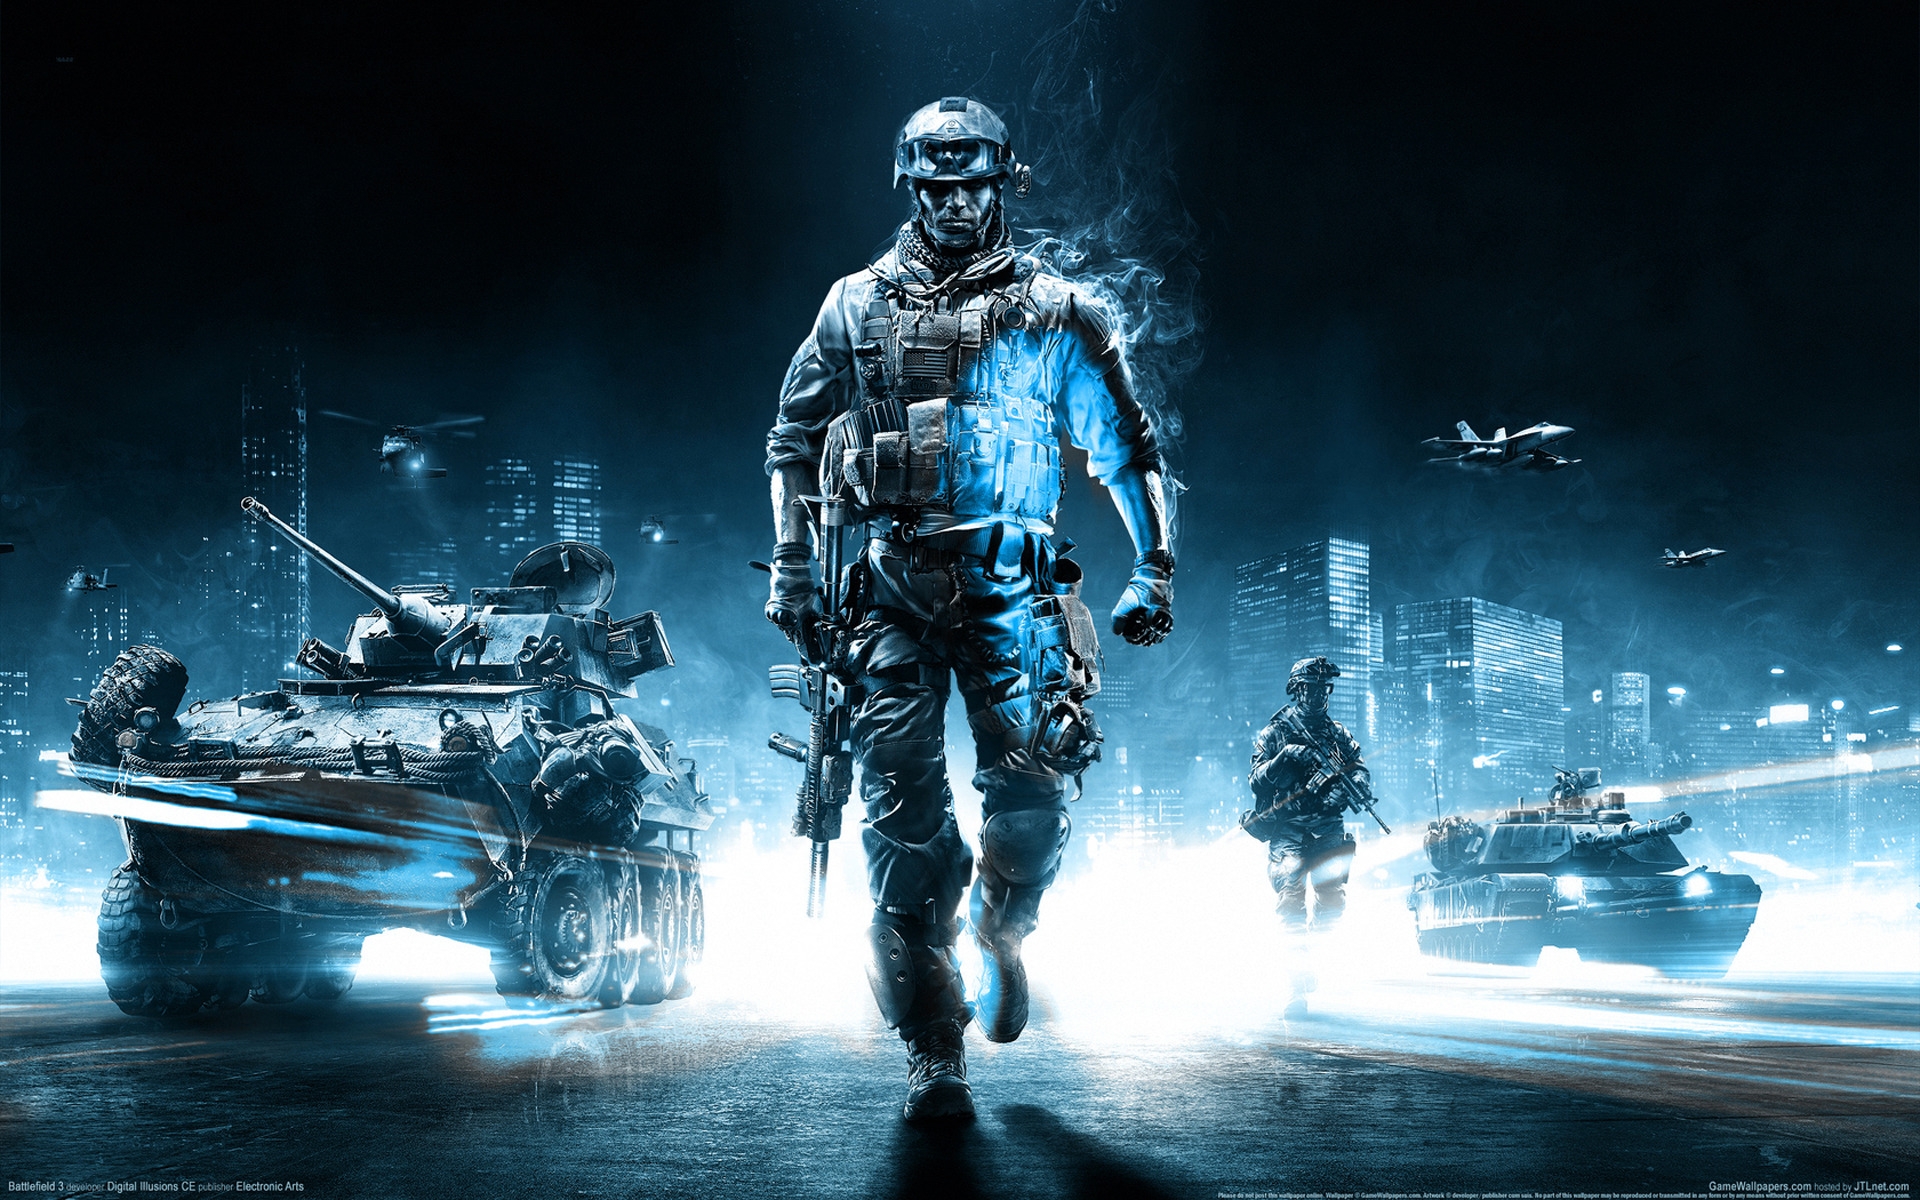 Battlefield 3 Action Game for 1920 x 1200 widescreen resolution